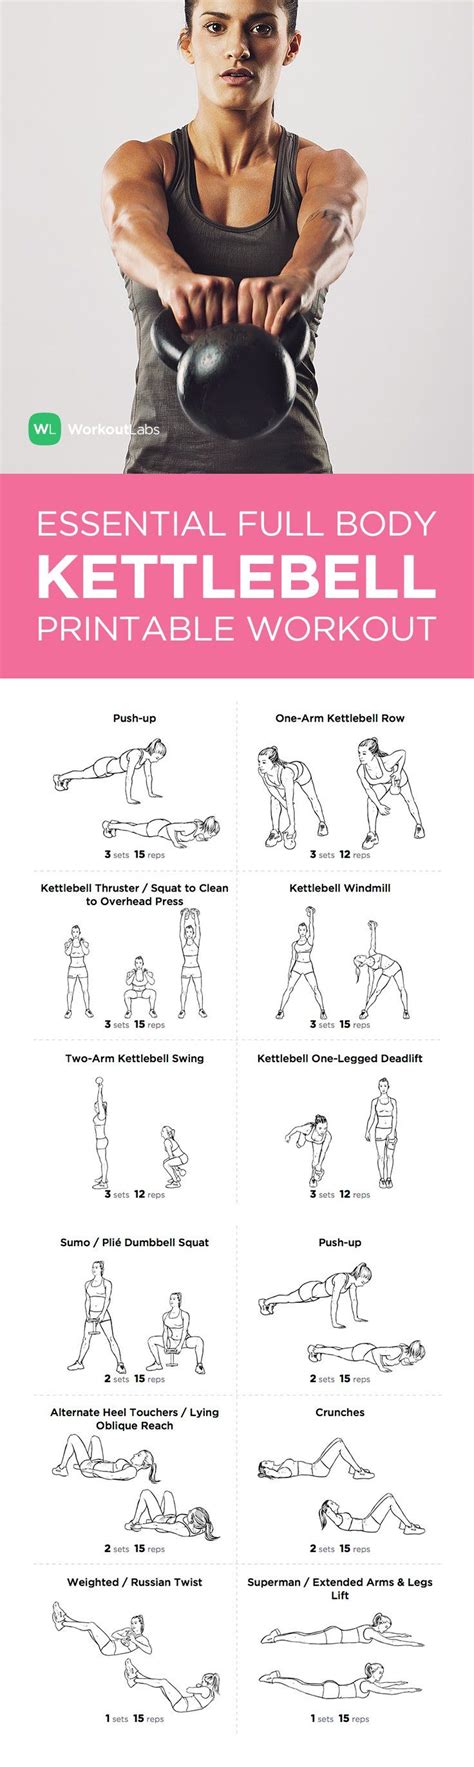 17 Best Images About Printable Workouts On Pinterest